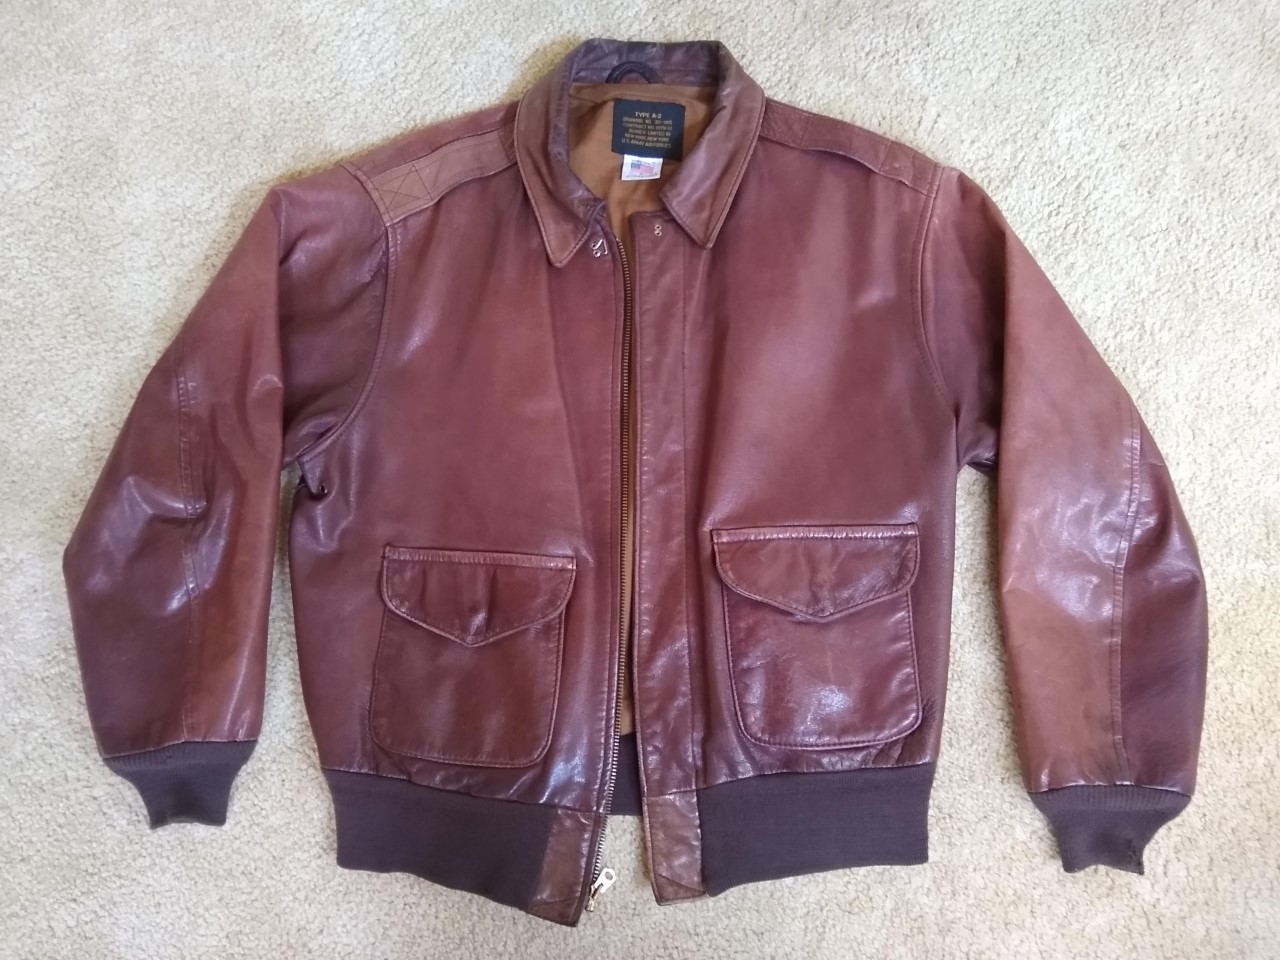 How it all began... | Vintage Leather Jackets Forum